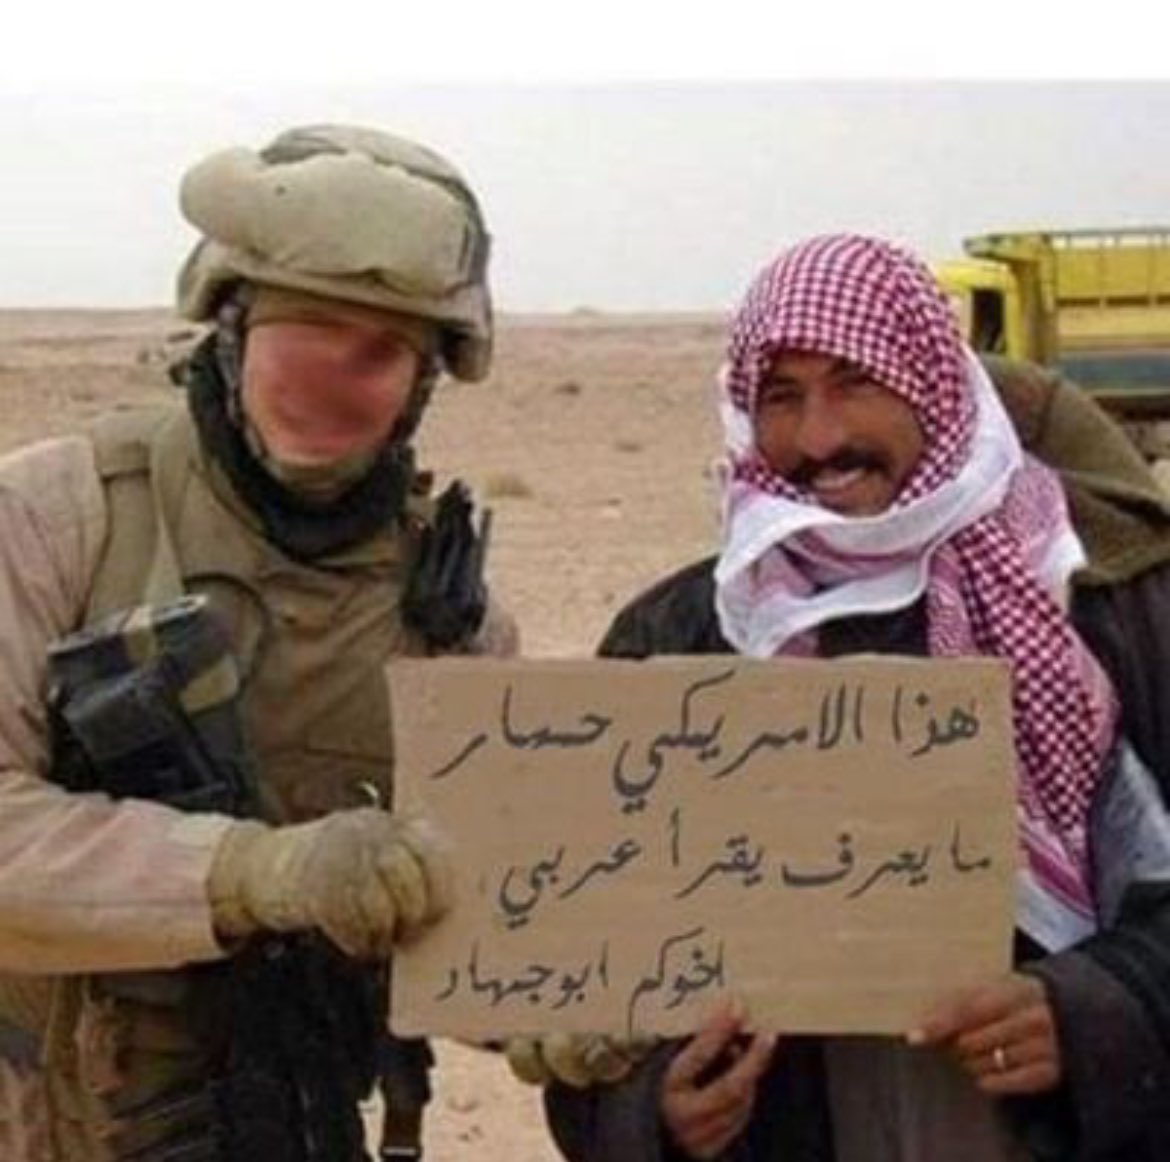 'This American is a donkey who can't read Arabic -Your brother, Abu Jihad'